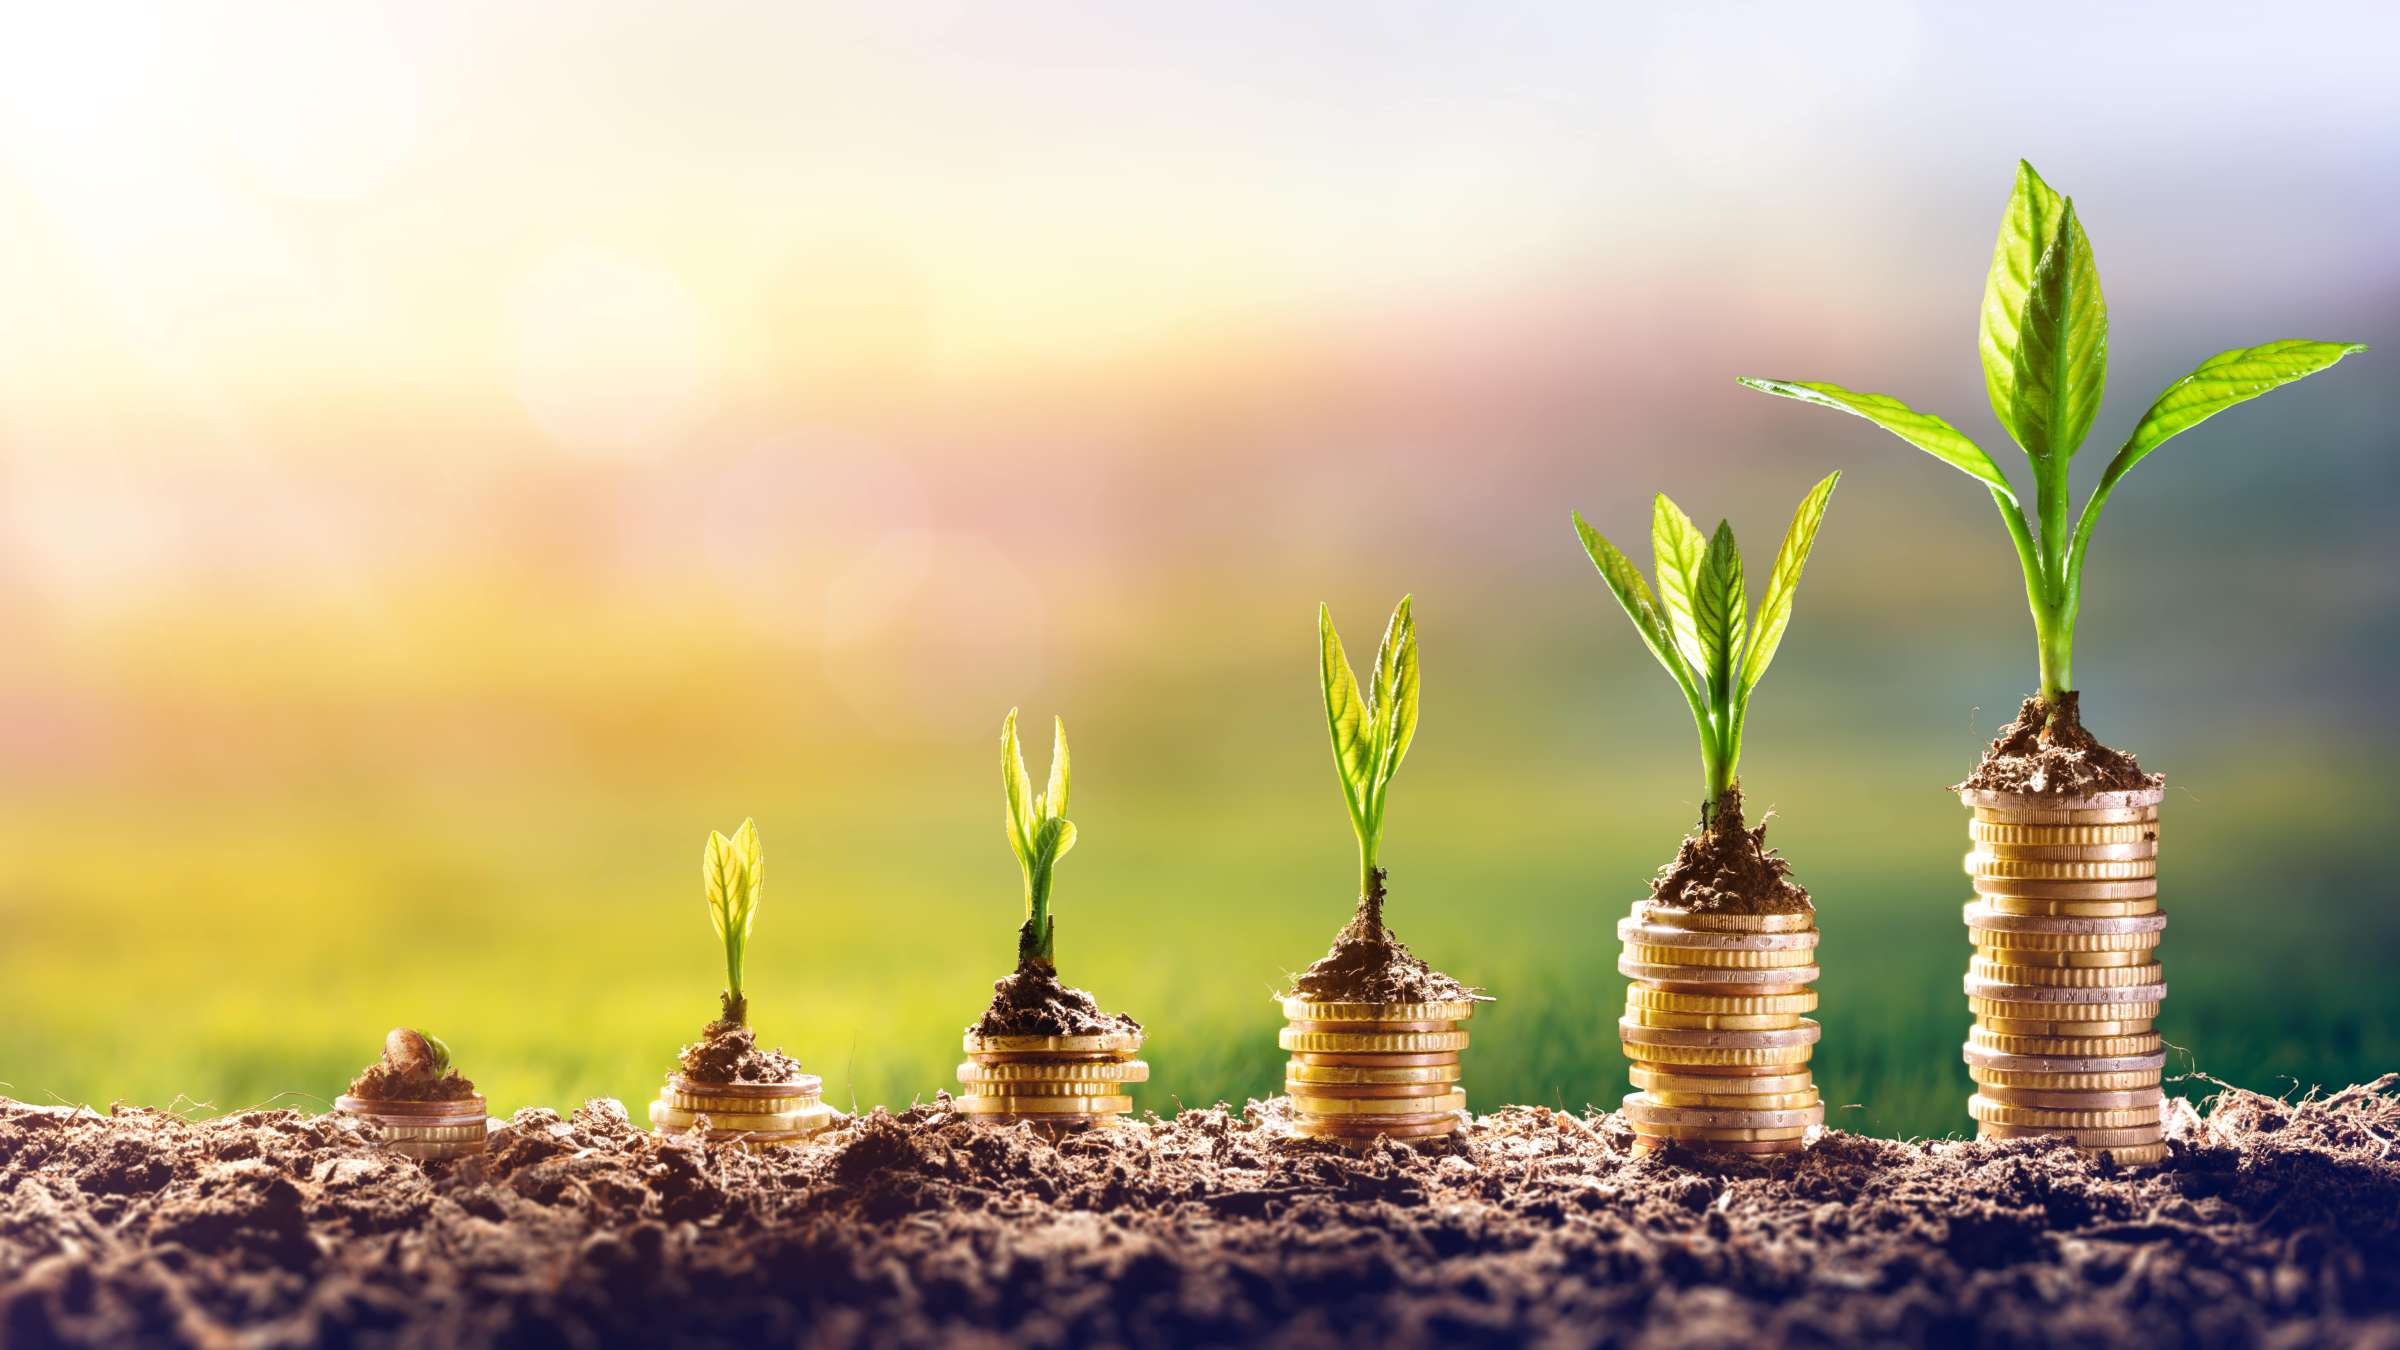 Growing Money - Planting in Coins - Financial and Investment Concept